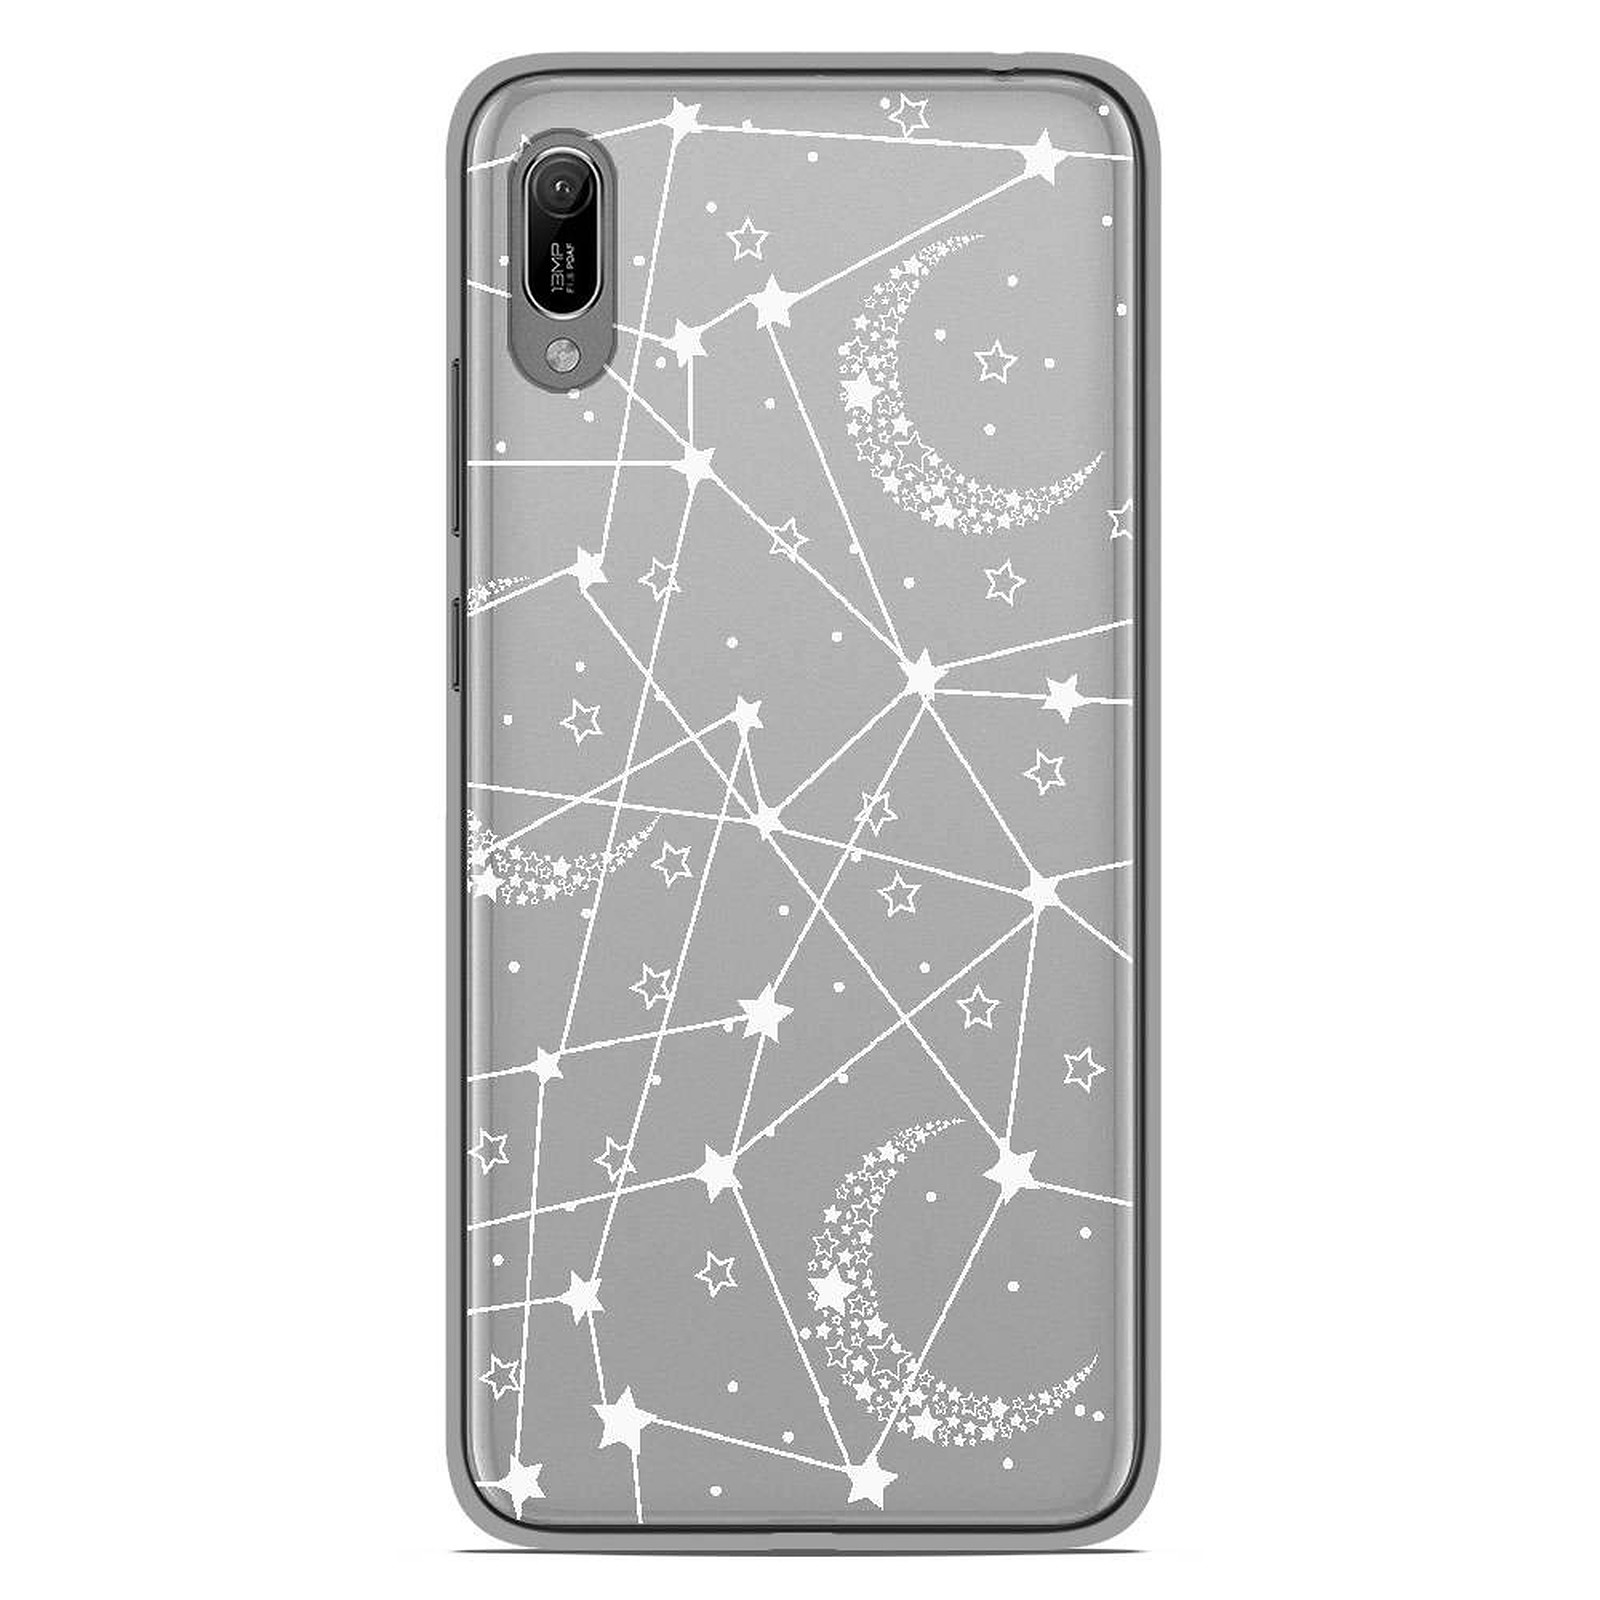 1001 Coques Coque silicone gel Huawei Y6 2019 motif Lignes etoilees - Coque telephone 1001Coques